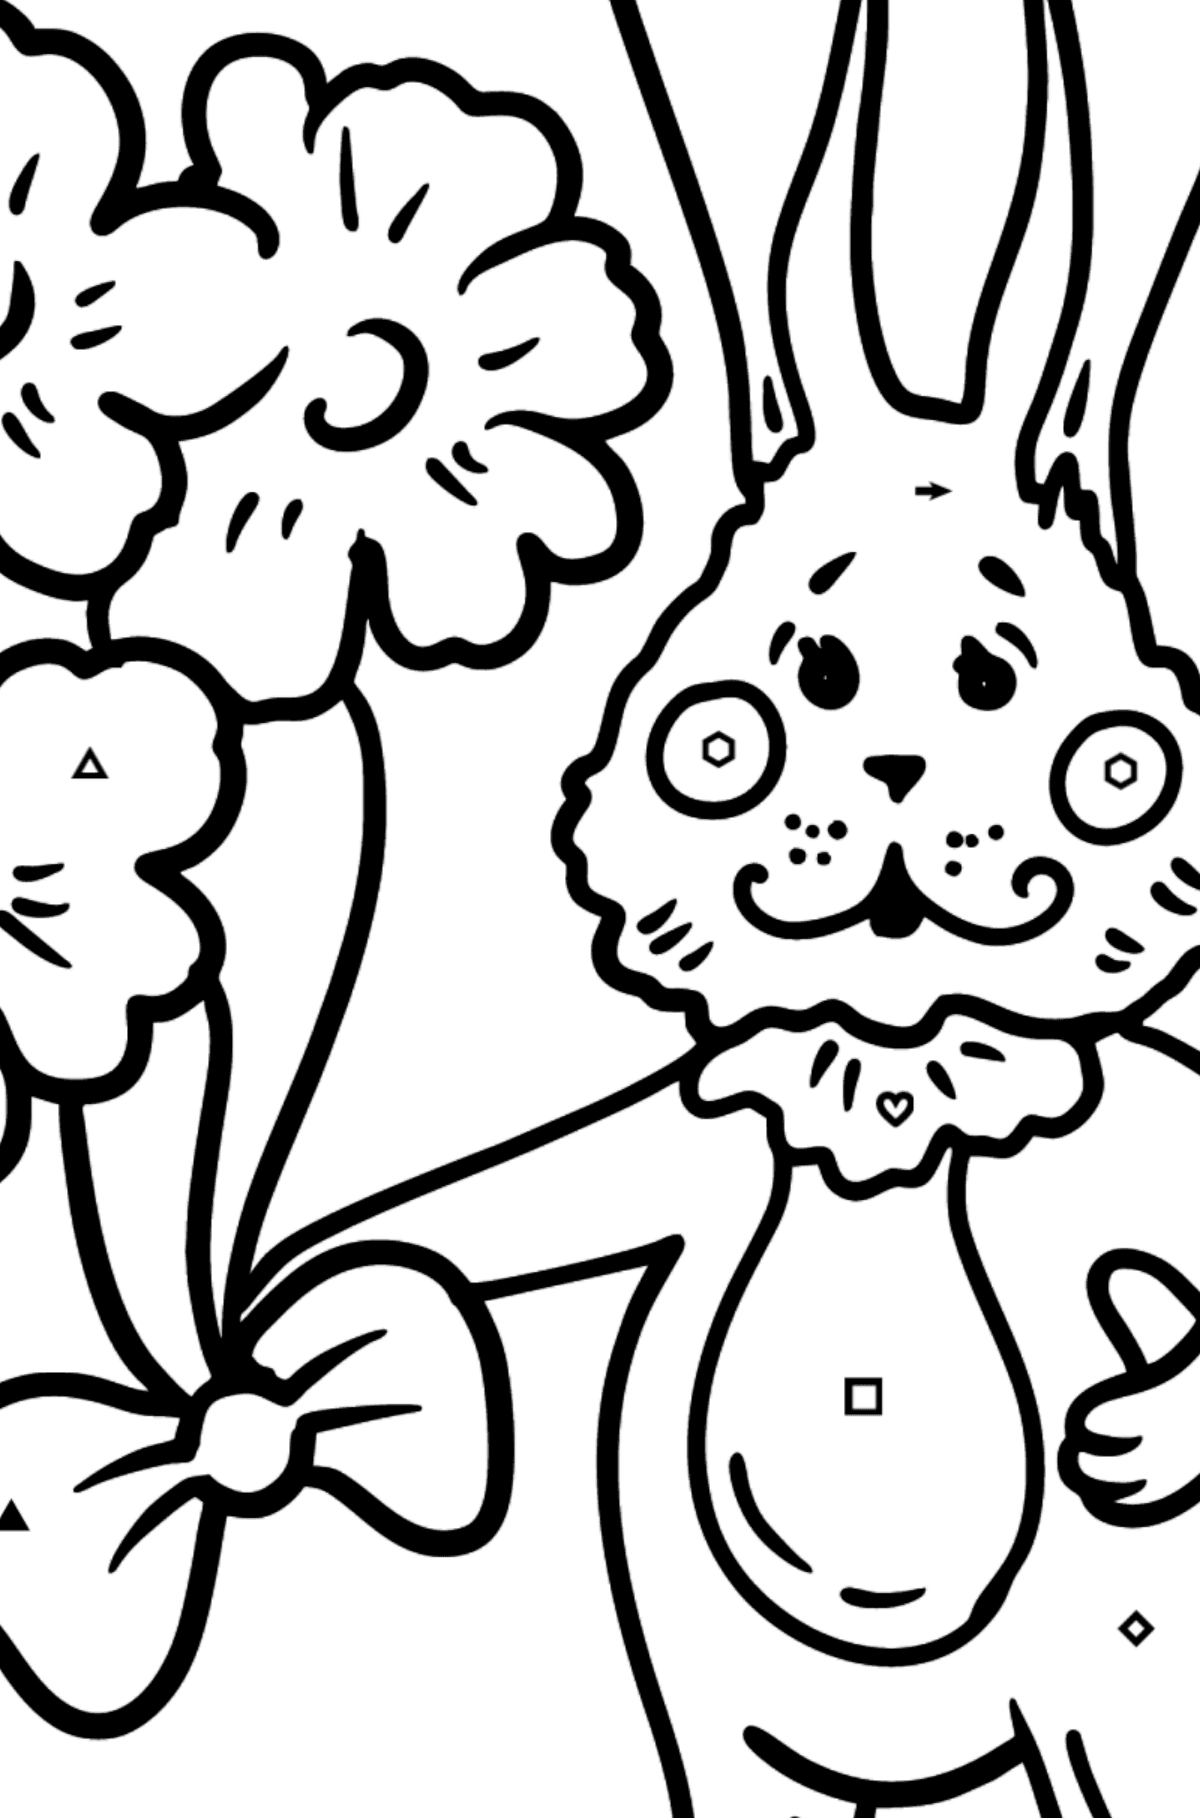 Bunny with a Bouquet of Flowers coloring page - Coloring by Symbols and Geometric Shapes for Kids